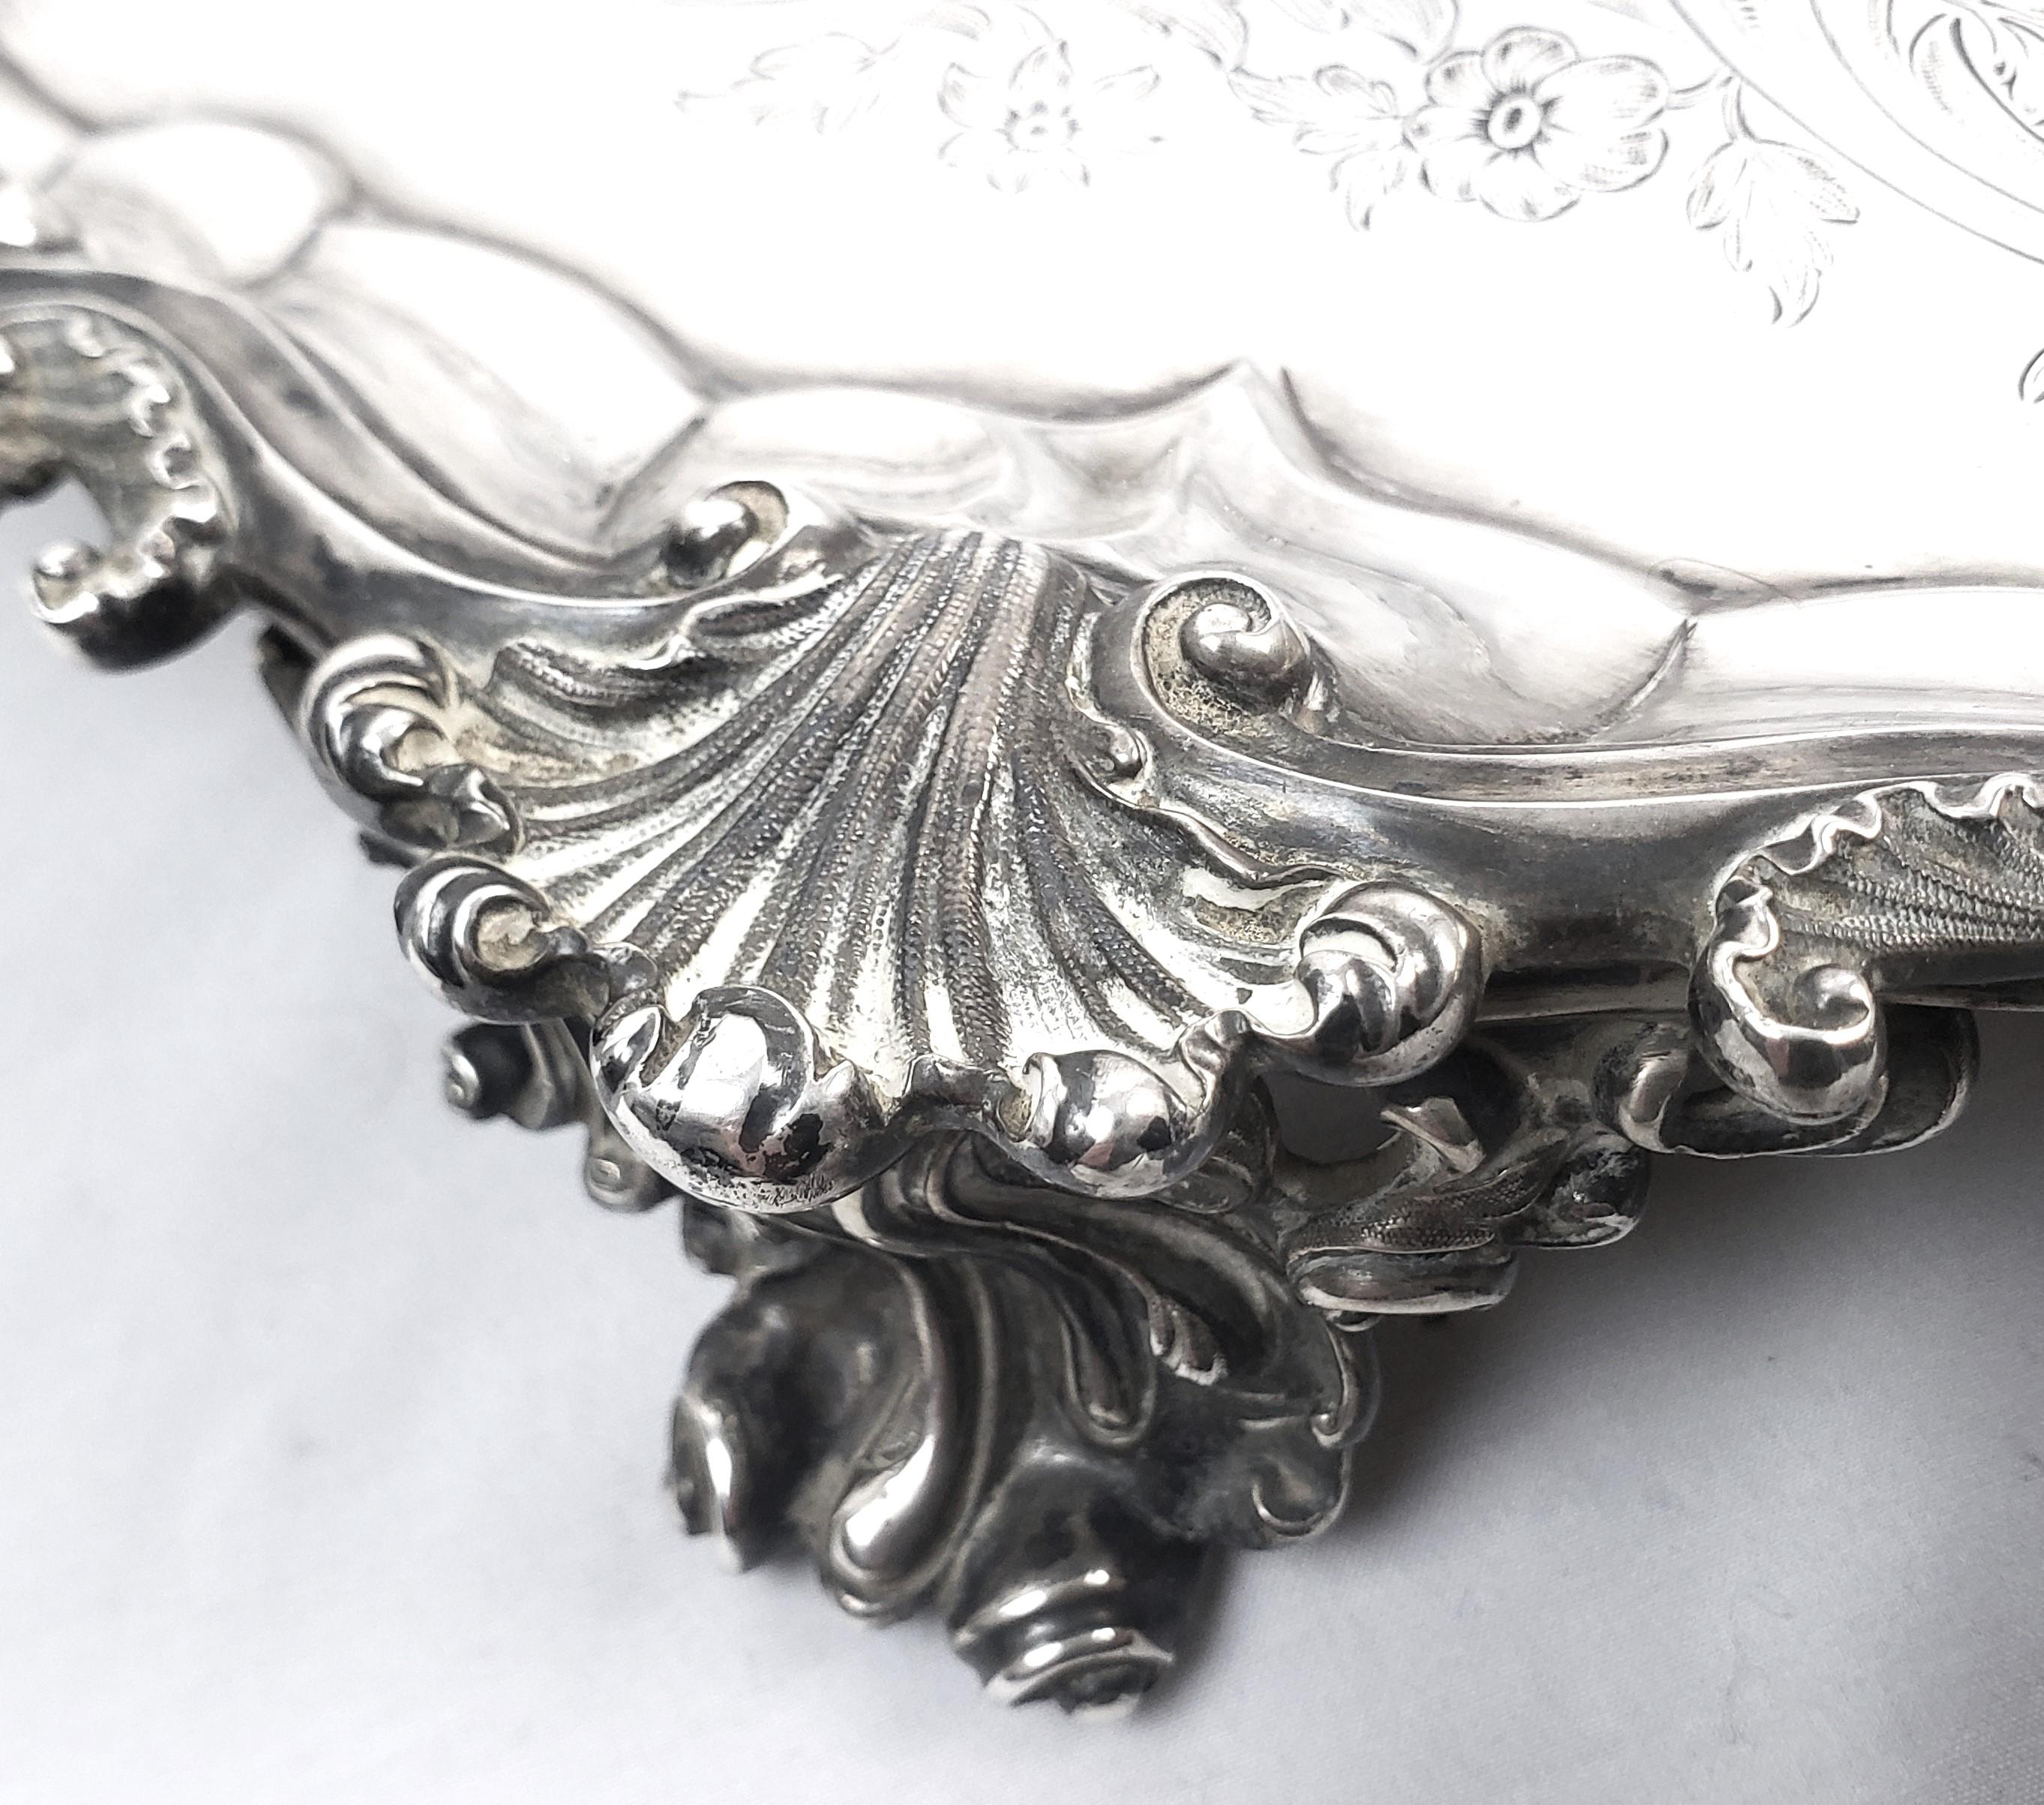 Huge Antique Sterling Silver Salver or Footed Tray with Ornate Floral Engraving For Sale 4